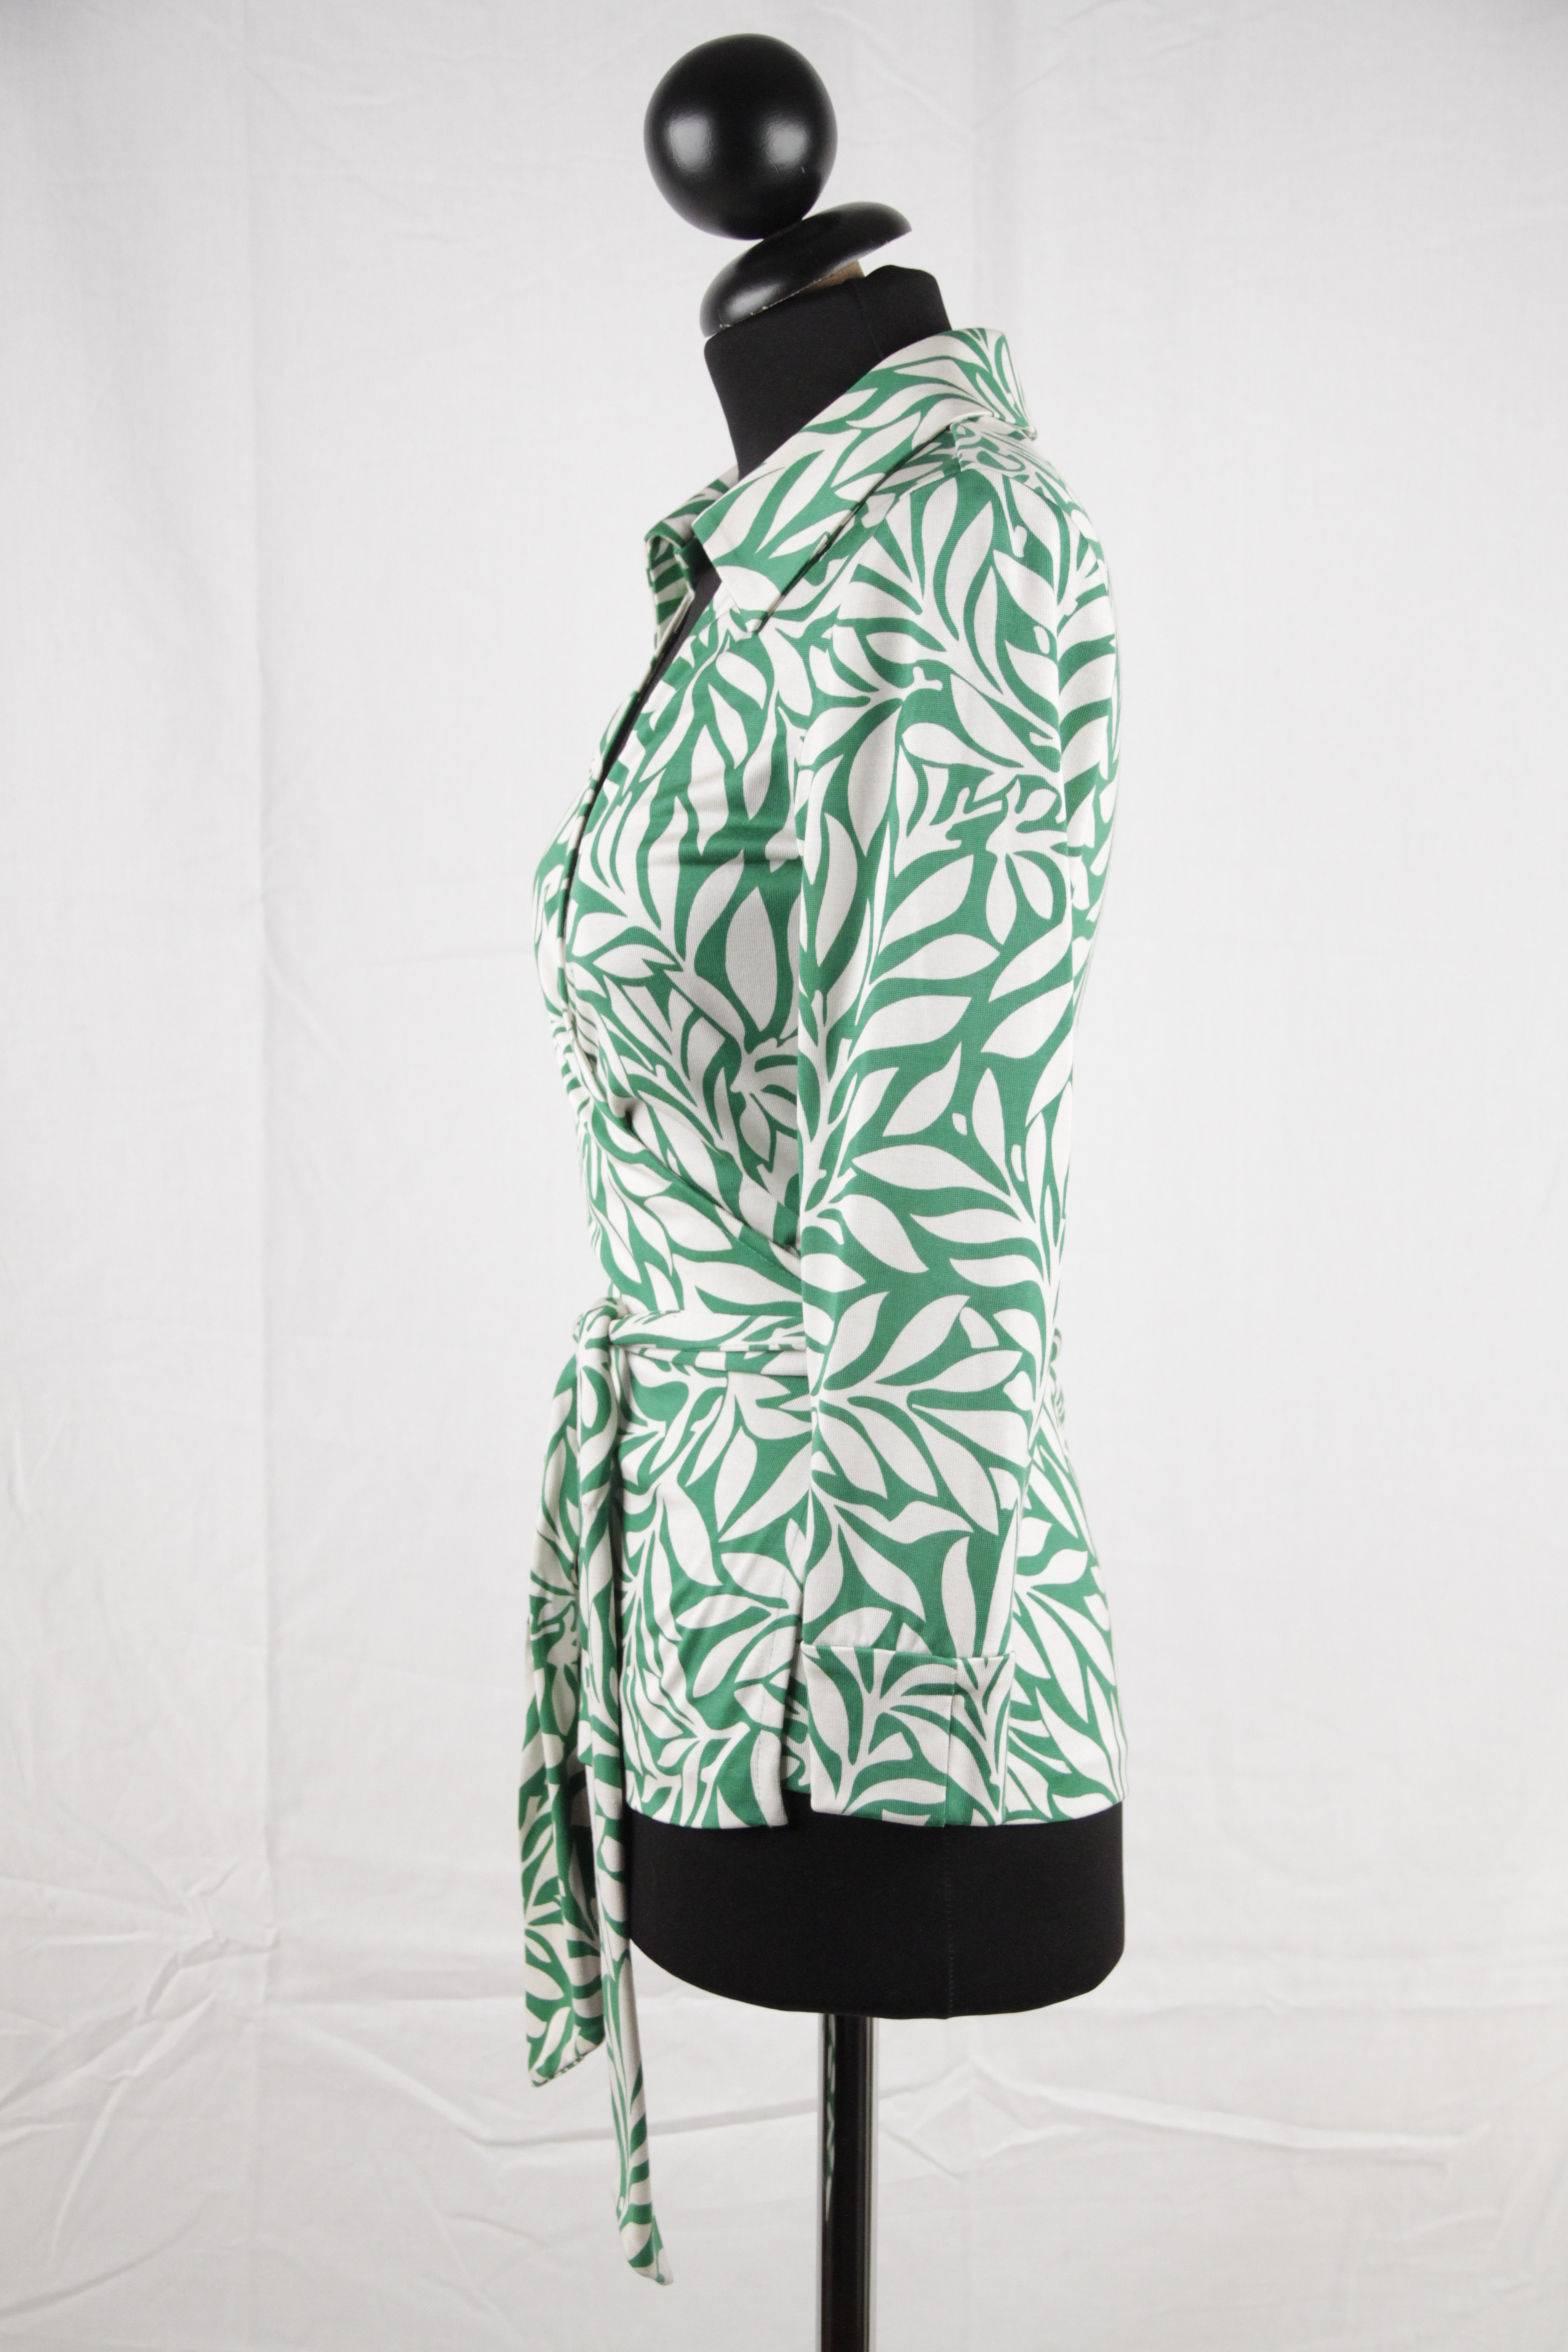  - Model: JILL Top

- Green & White leaves pattern

- 100% silk jersey

- Shirt collar & V-neck

- Wrap design

- Cropped sleeves

- Size: 4 (The size shown for this item is the size indicated by the designer on the label). It should